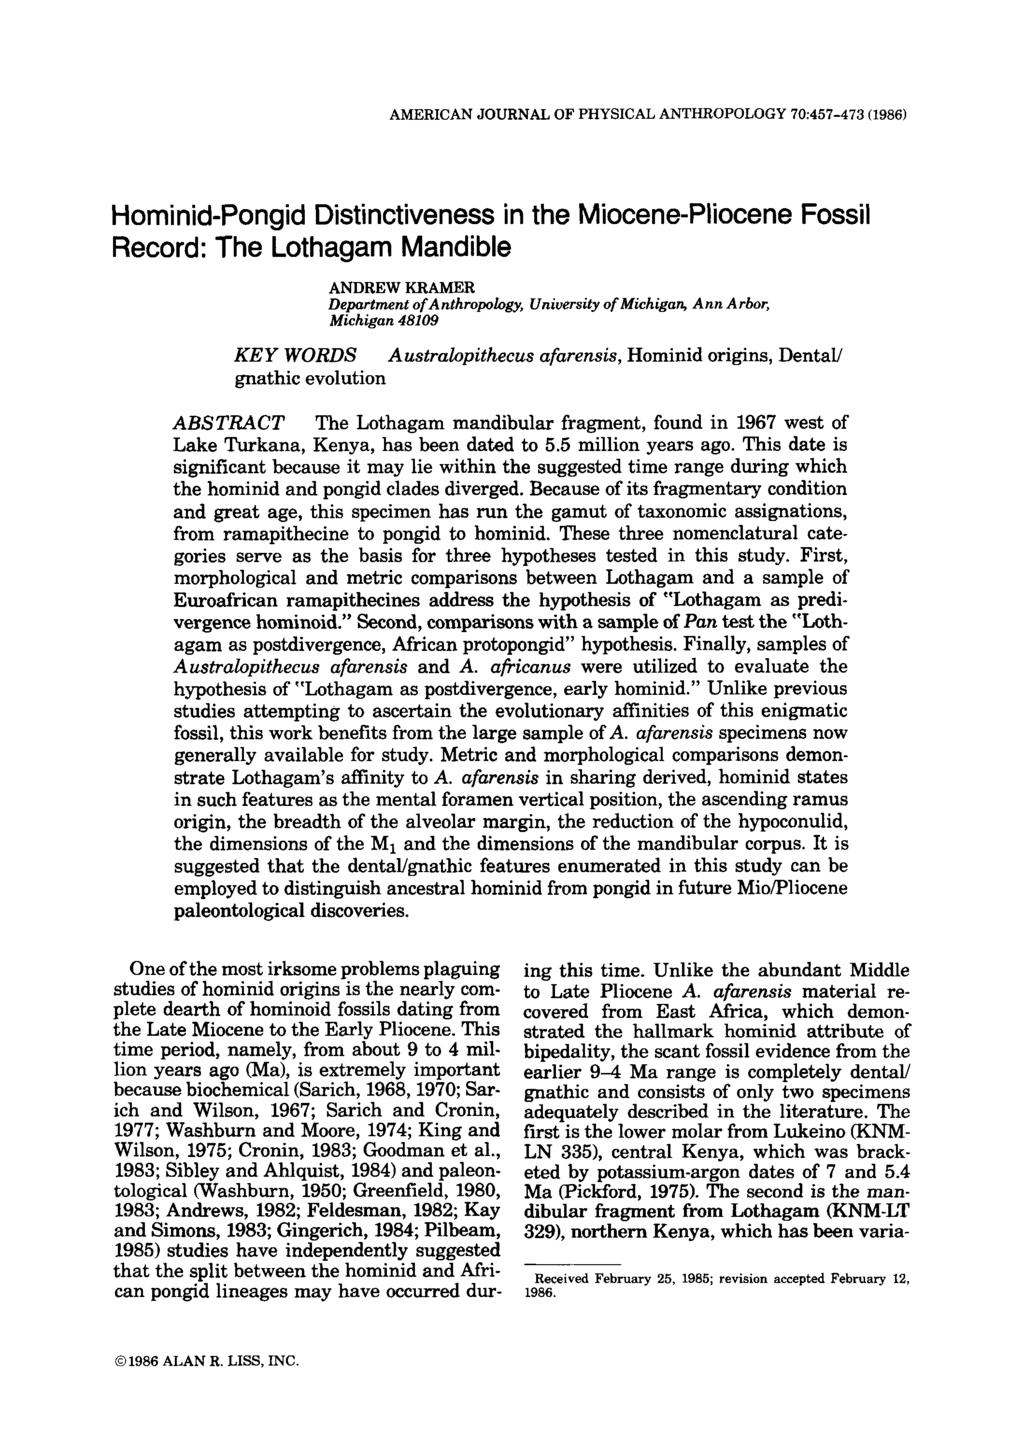 AMERICAN JOURNAL OF PHYSICAL ANTHROPOLOGY 70:457-473 (1986) Hominid-Pongid Distinctiveness in the Miocene-Pliocene Fossil Record: The Lothagam Mandible ANDREW KRAMER Department of Anthropology,